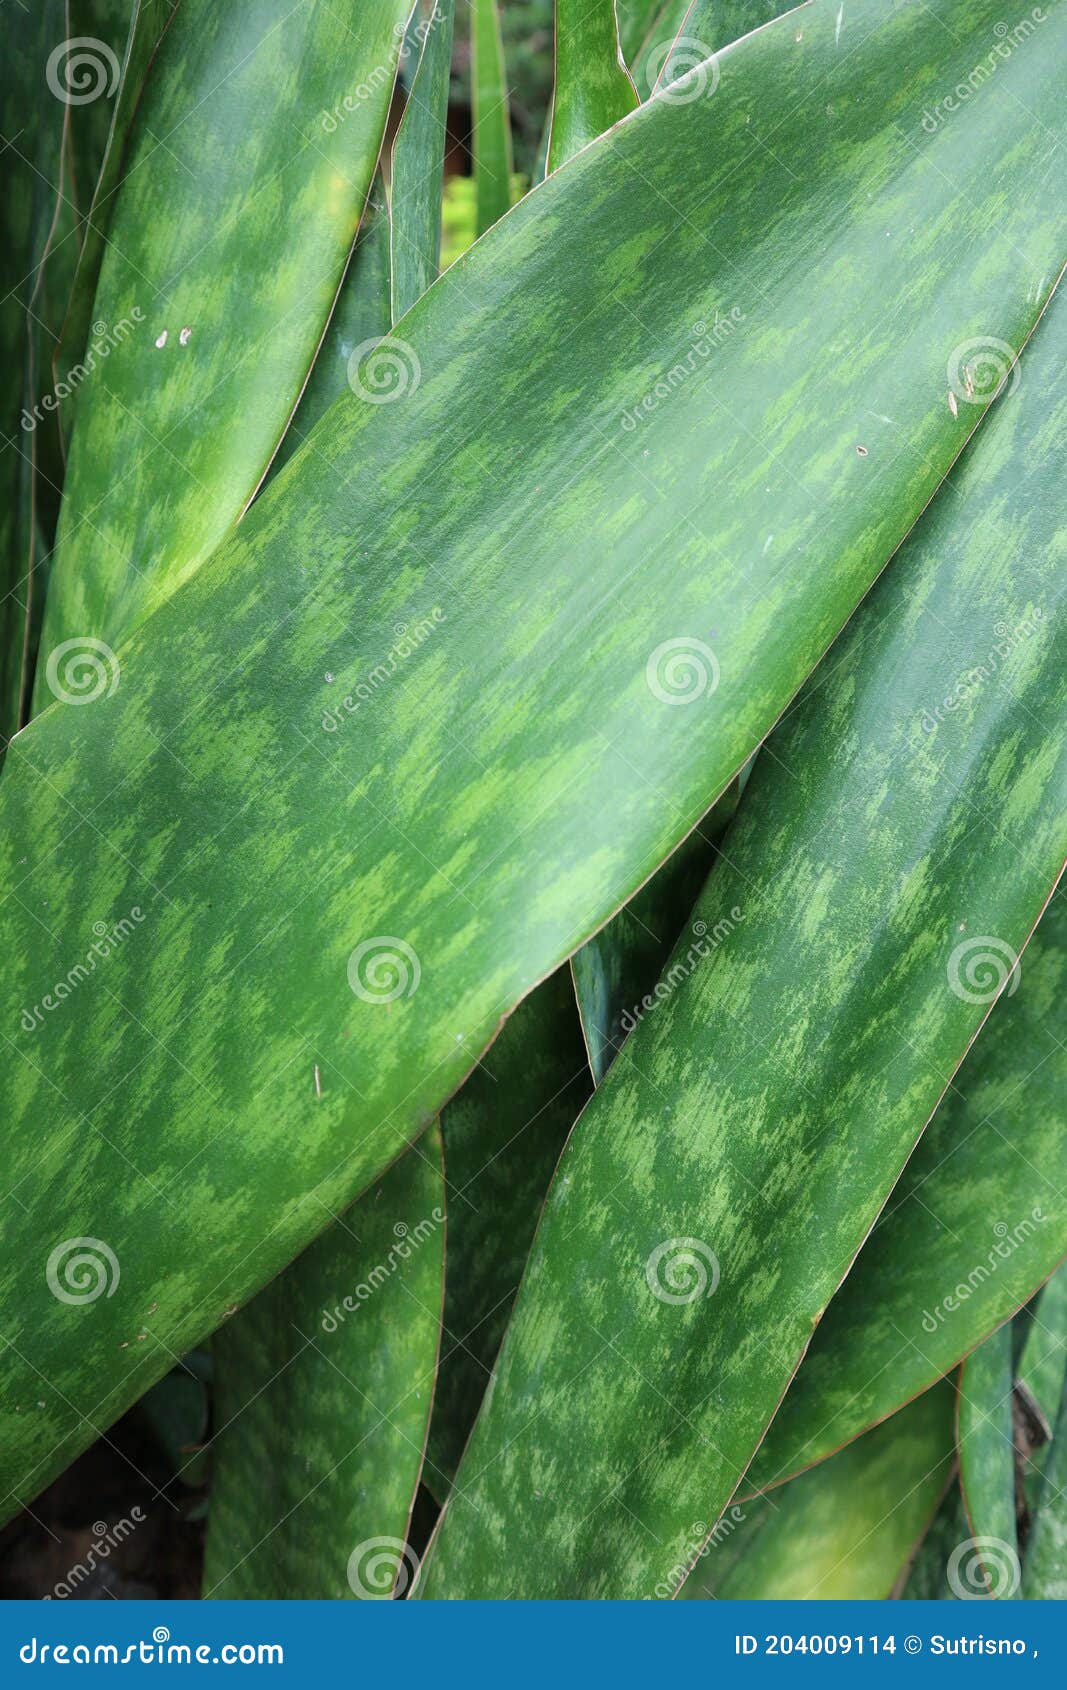 Natural Green Leafy Sansevieria is Suitable for Backgrounds and